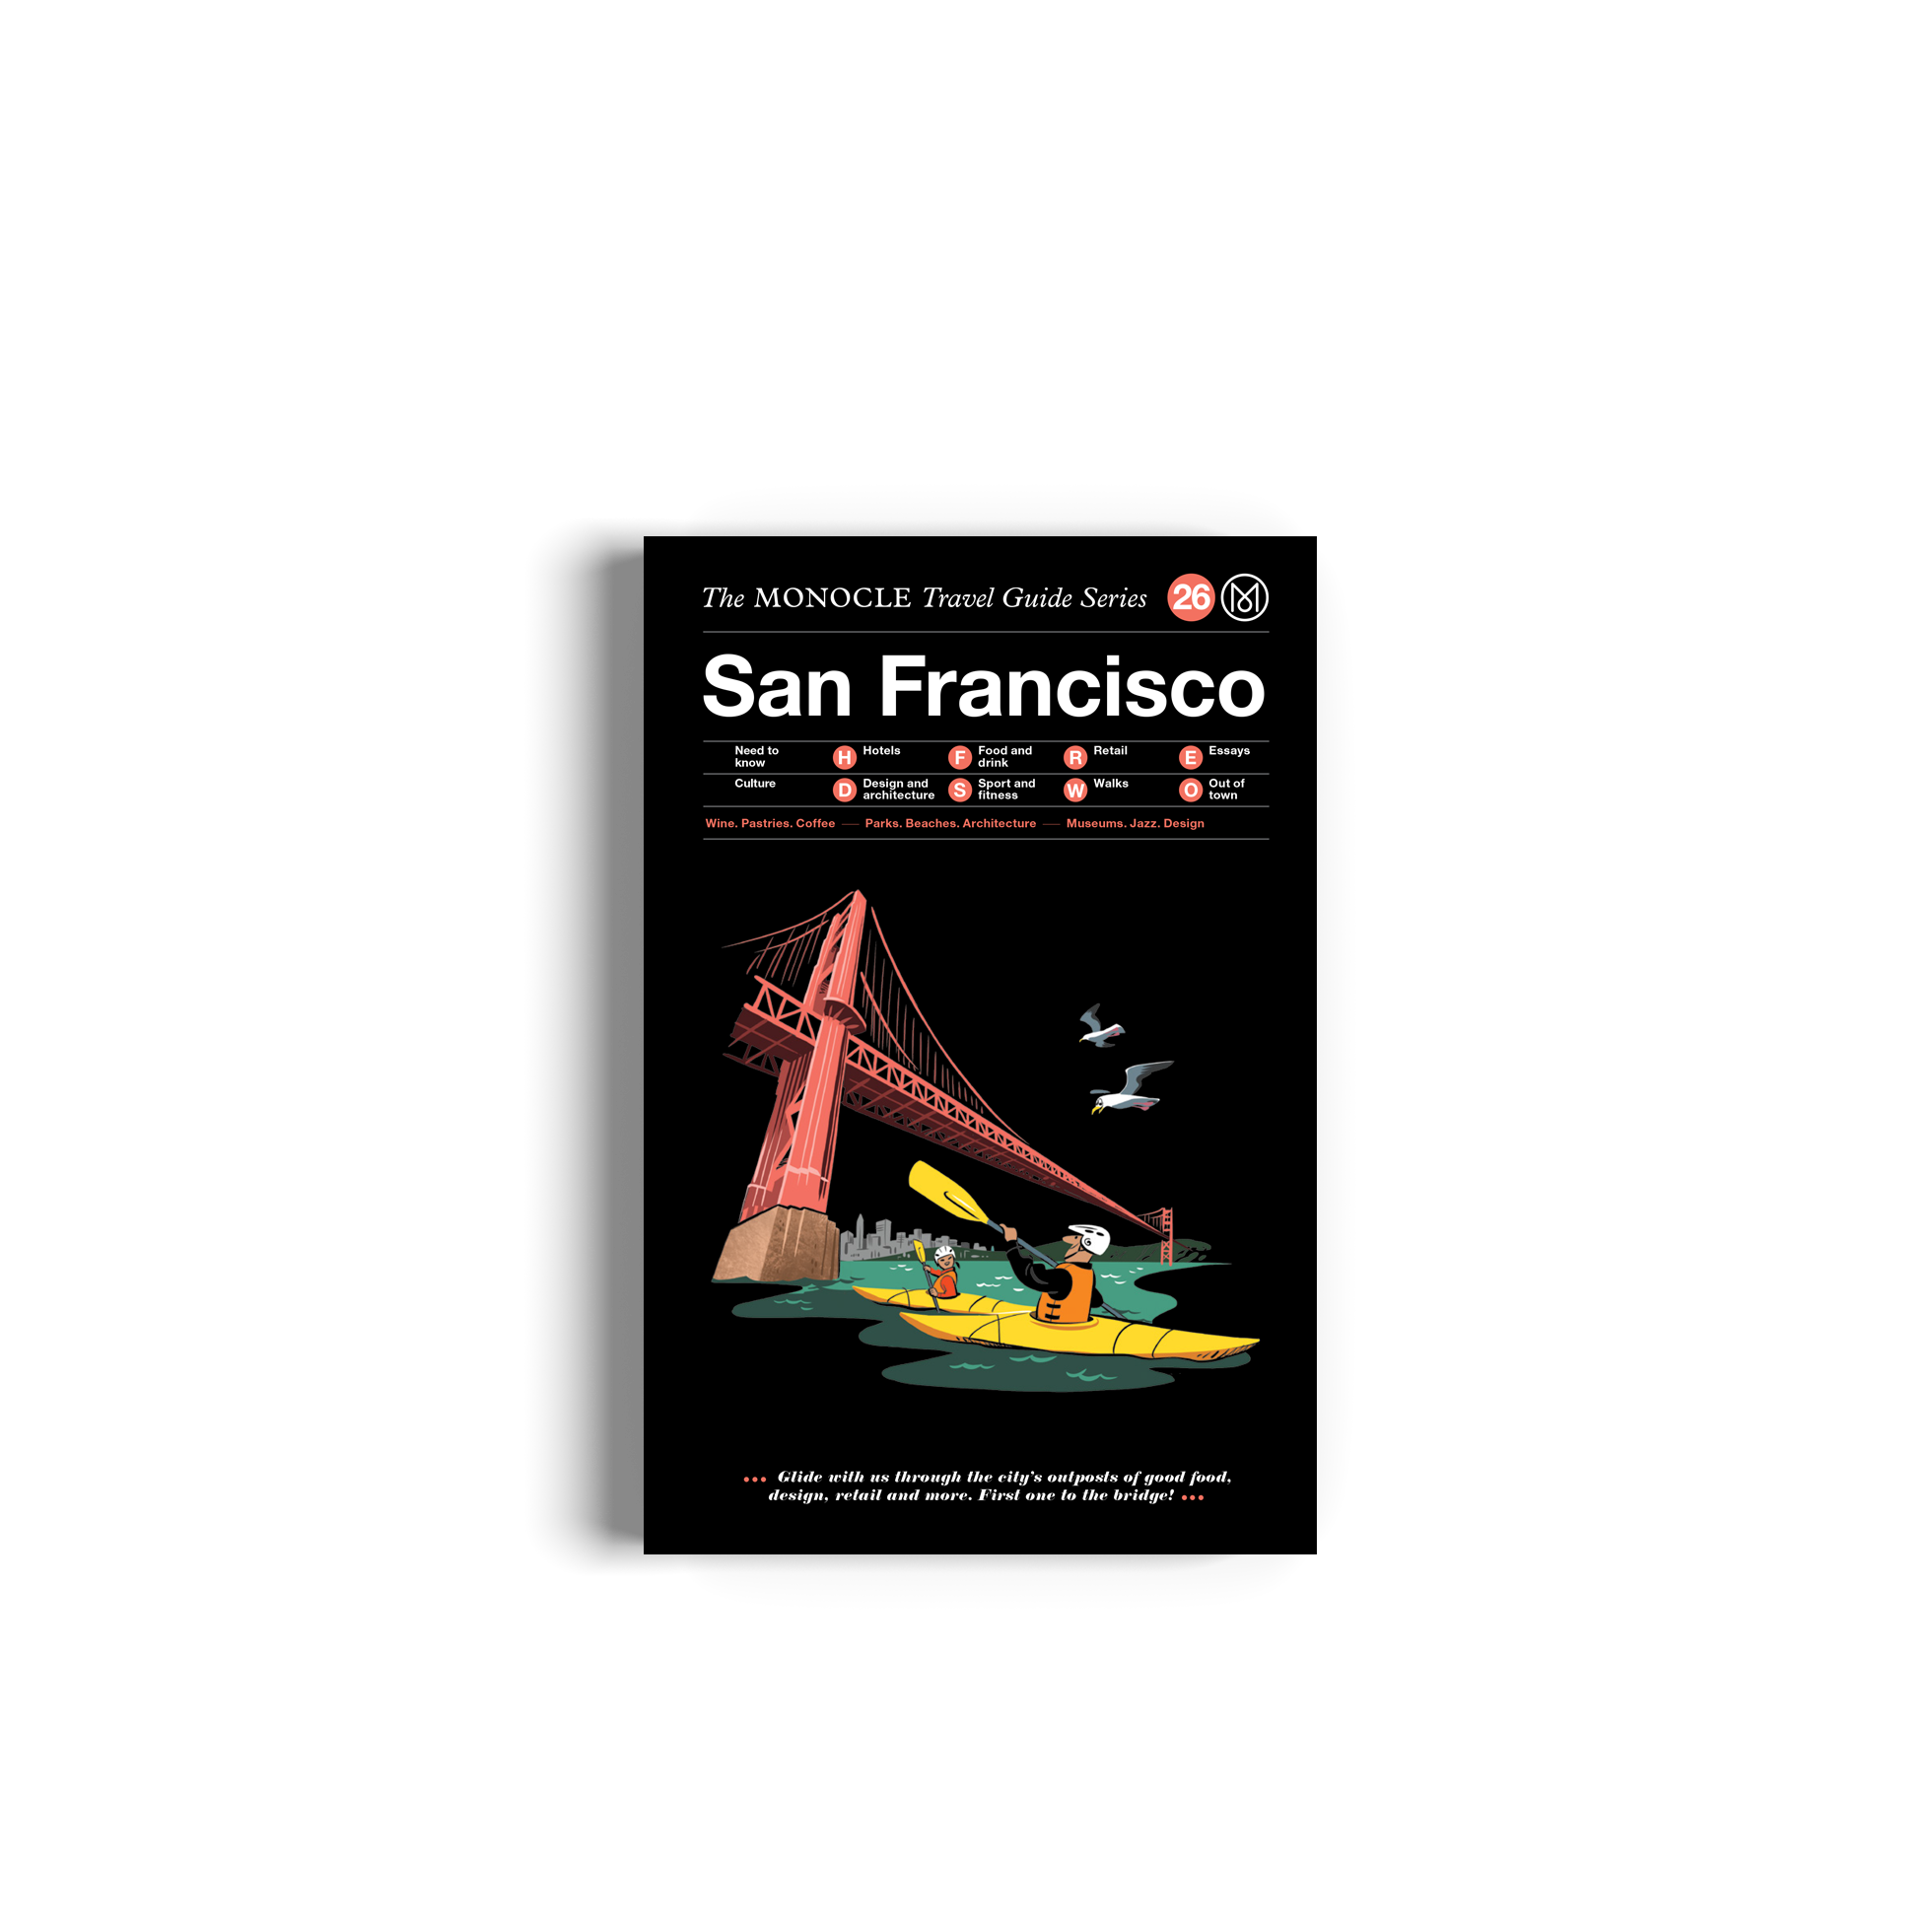 The Monocle Travel Guide to San Francisco - by Tyler Brule & Andrew Tuck  (Hardcover)